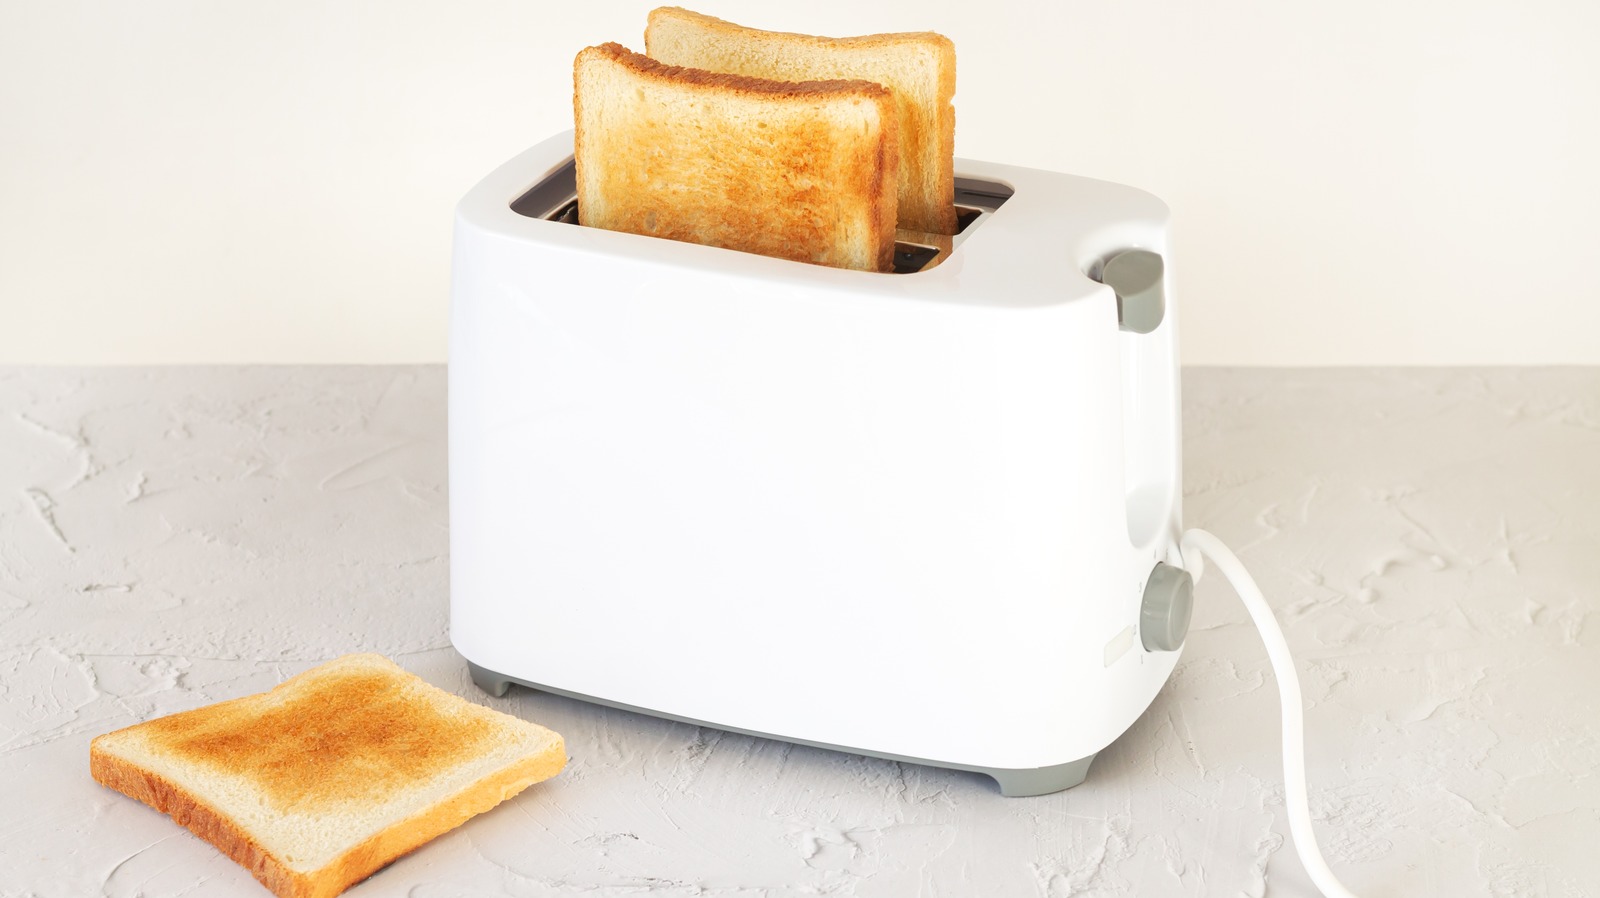 https://www.thedailymeal.com/img/gallery/the-easiest-approach-to-getting-crumbs-out-of-your-toaster/l-intro-1671378737.jpg